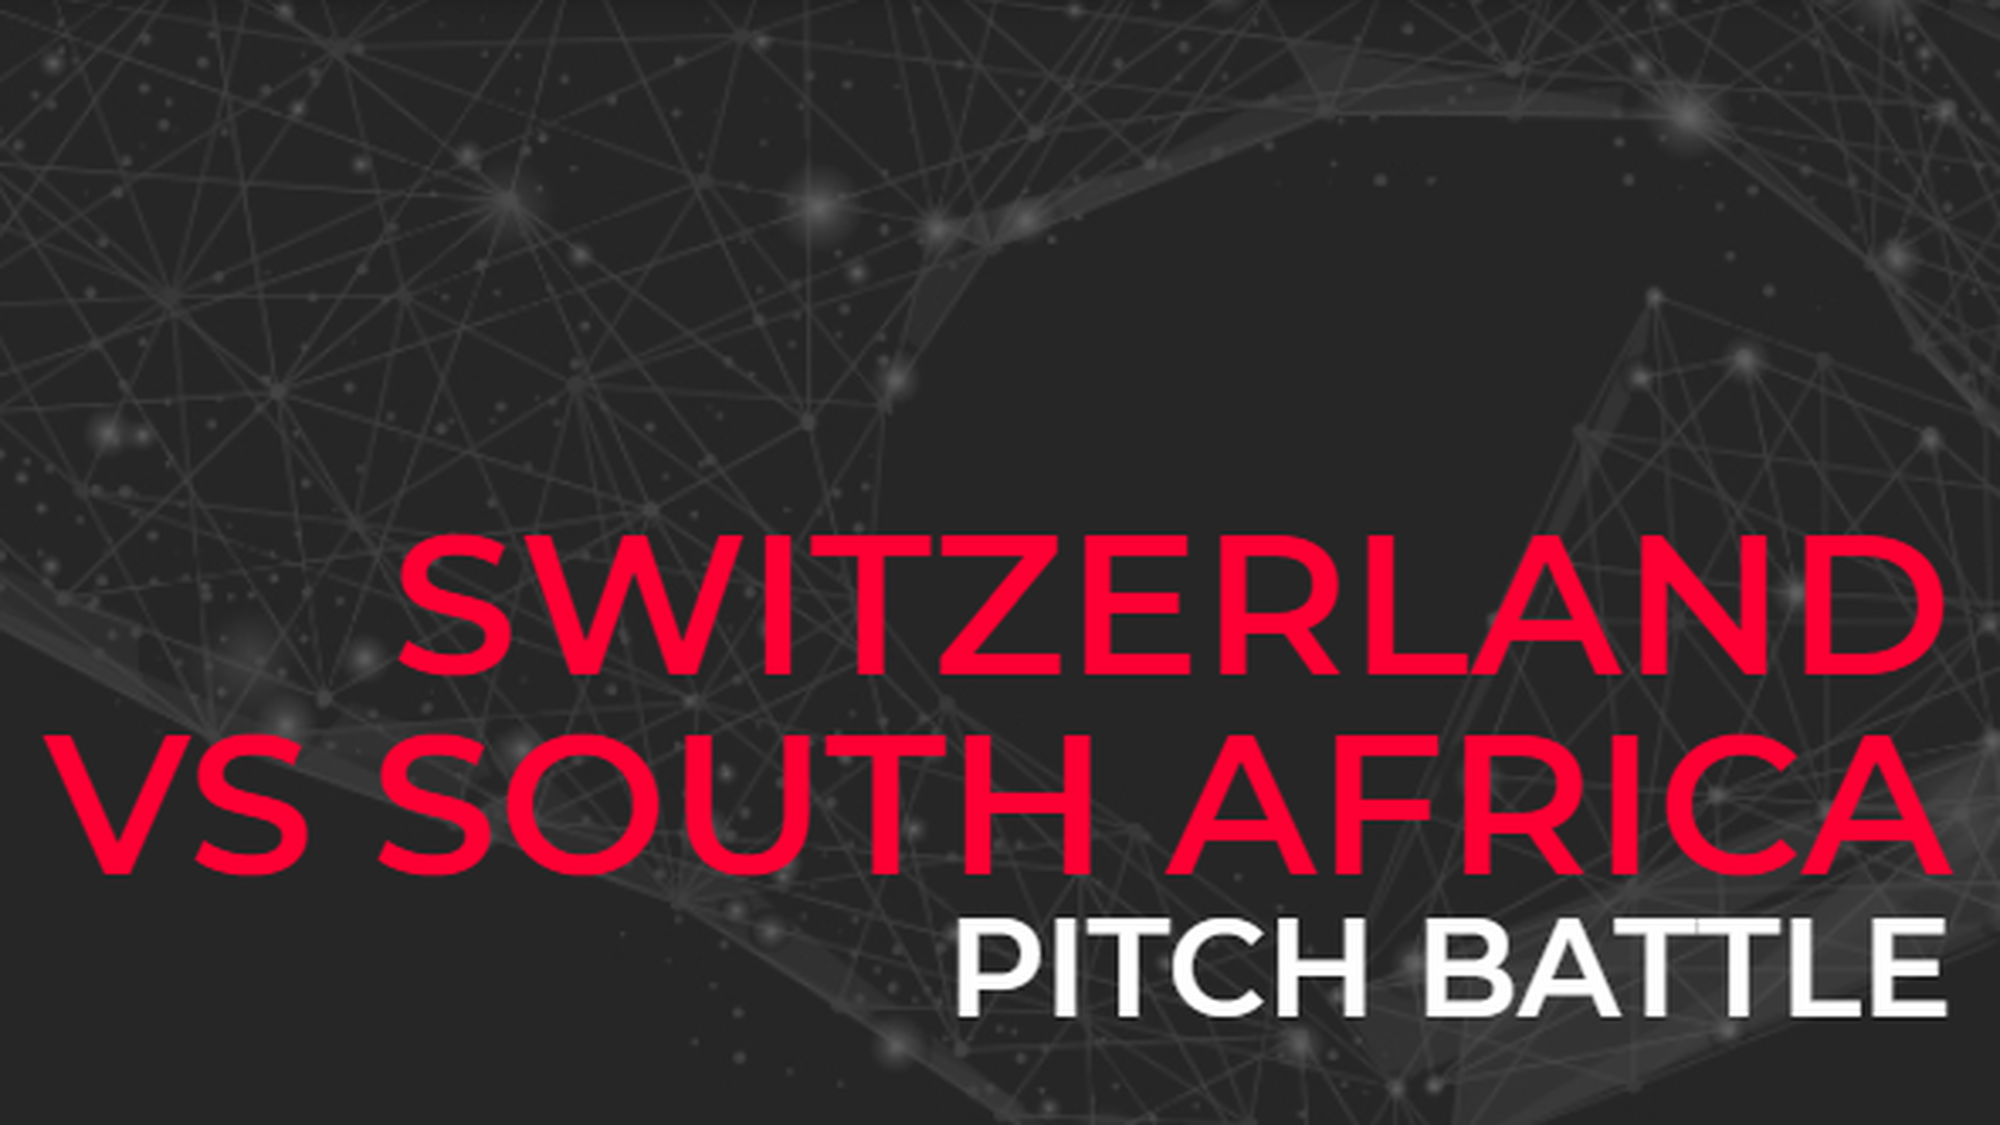 Swiss South African Pitch Battle at the 2020 South African Innovation Summit